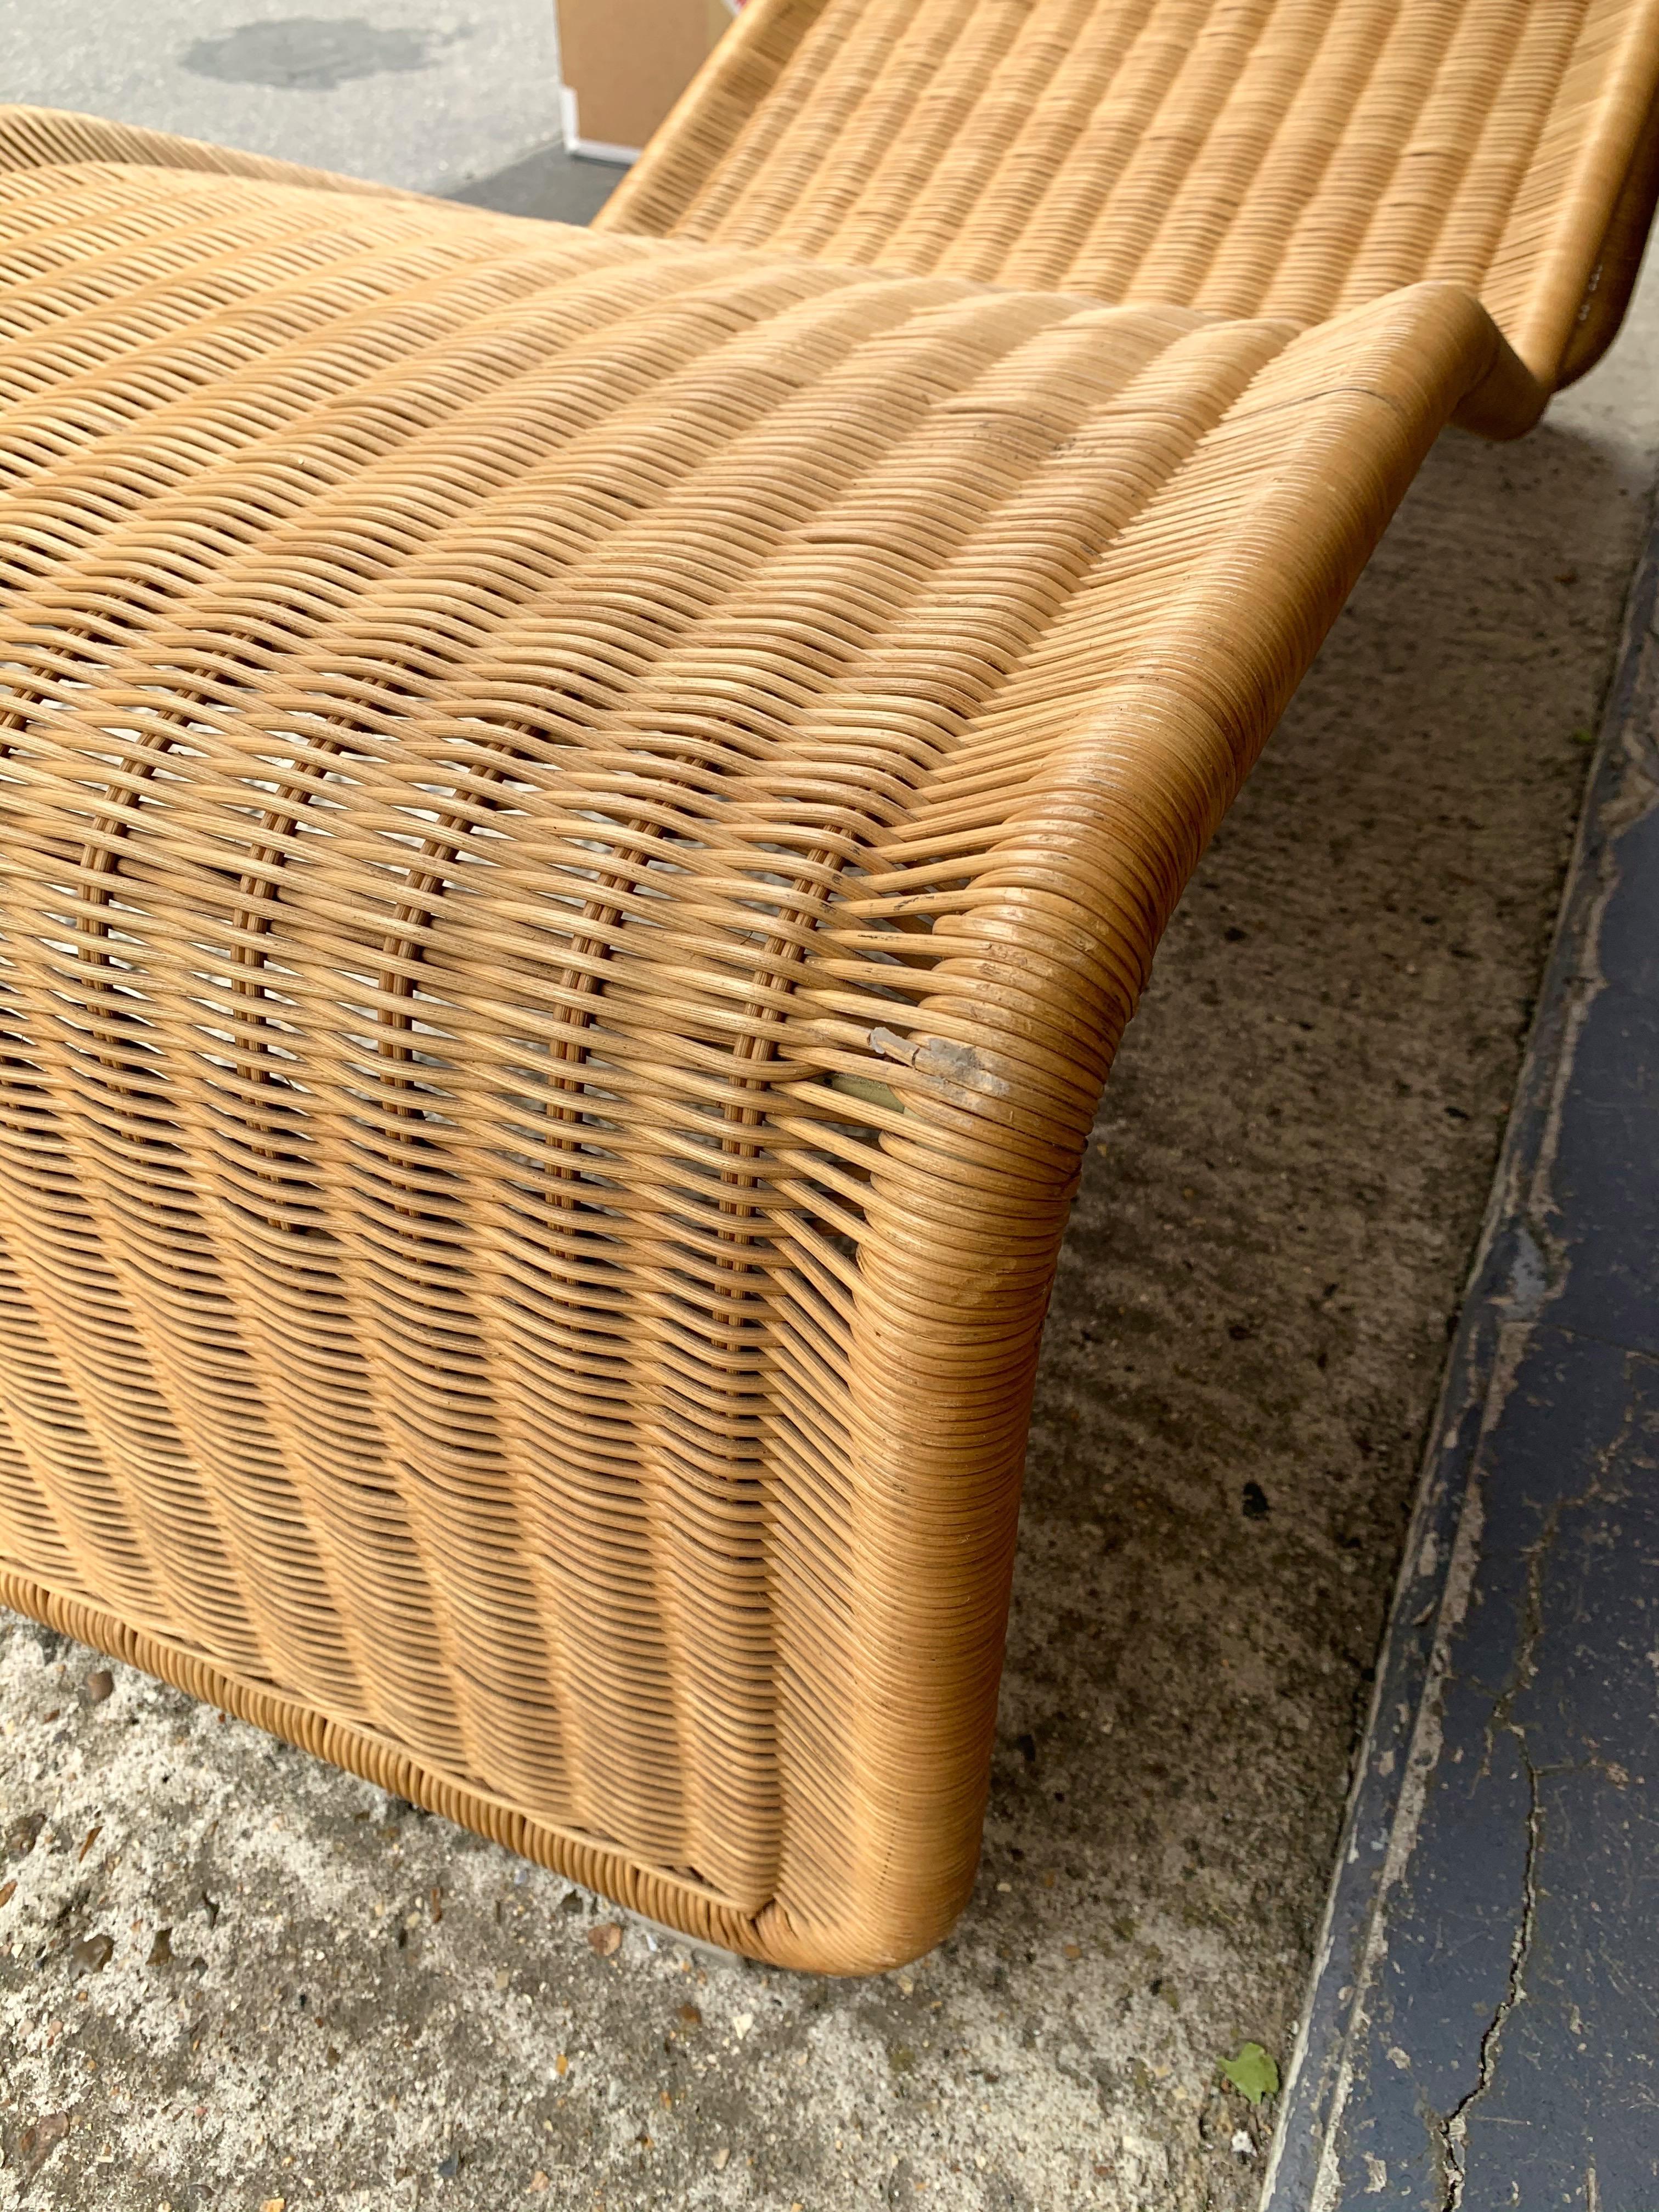 Mid-Century Modern Rattan Chaise Longue Lounger Chair P3 by Tito Agnoli, Italy, 1970s